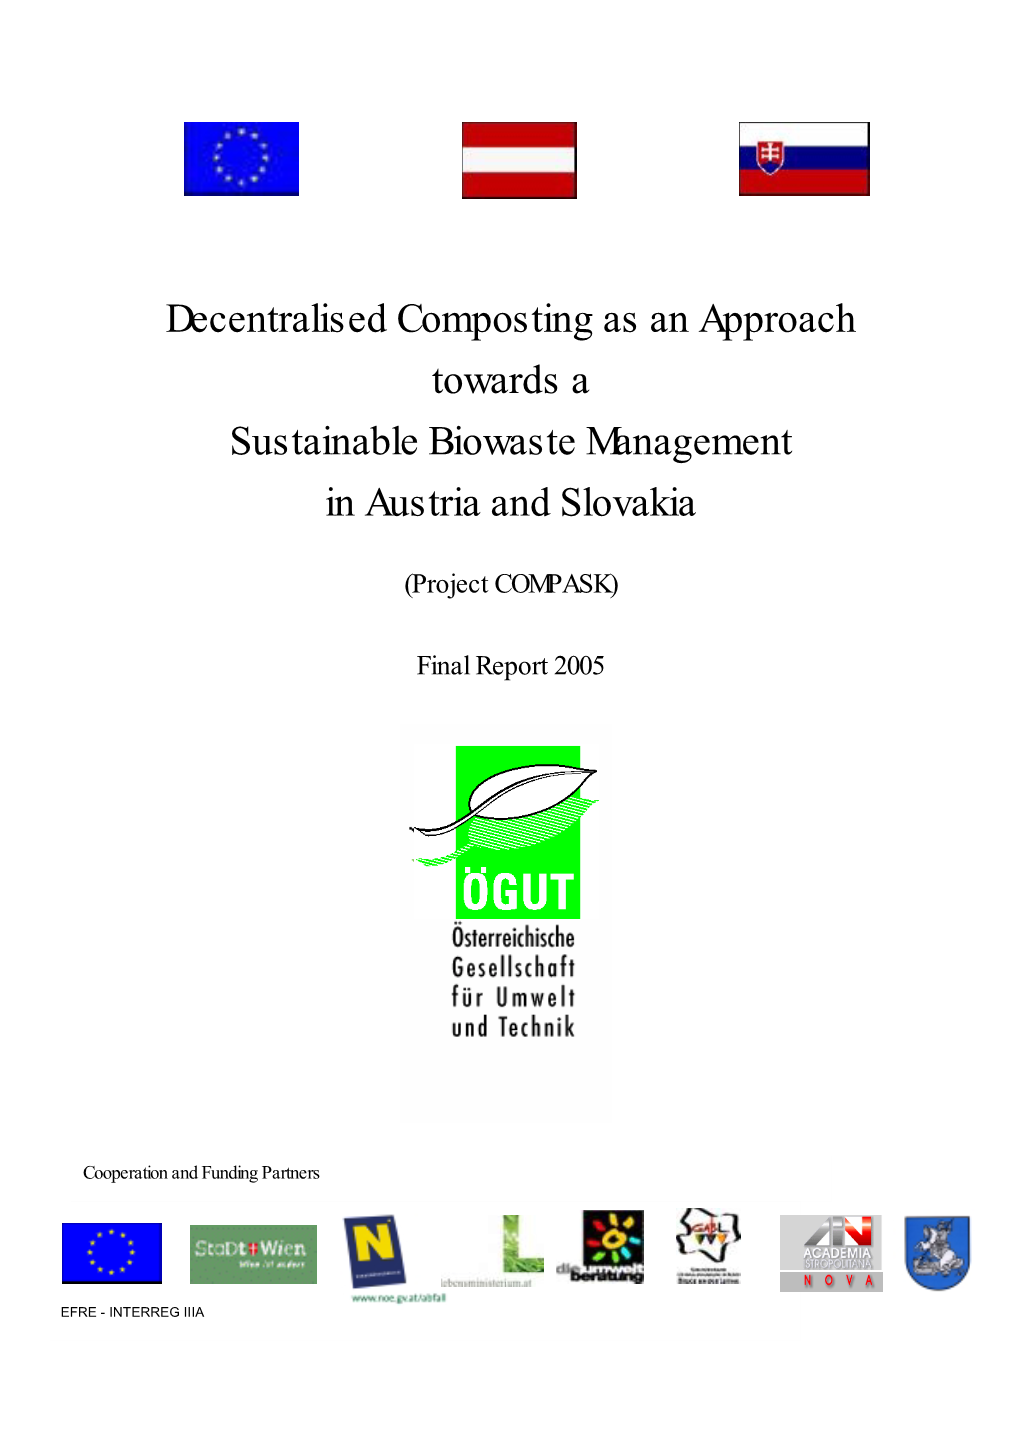 Decentralised Composting As an Approach Towards a Sustainable Biowaste Management in Austria and Slovakia